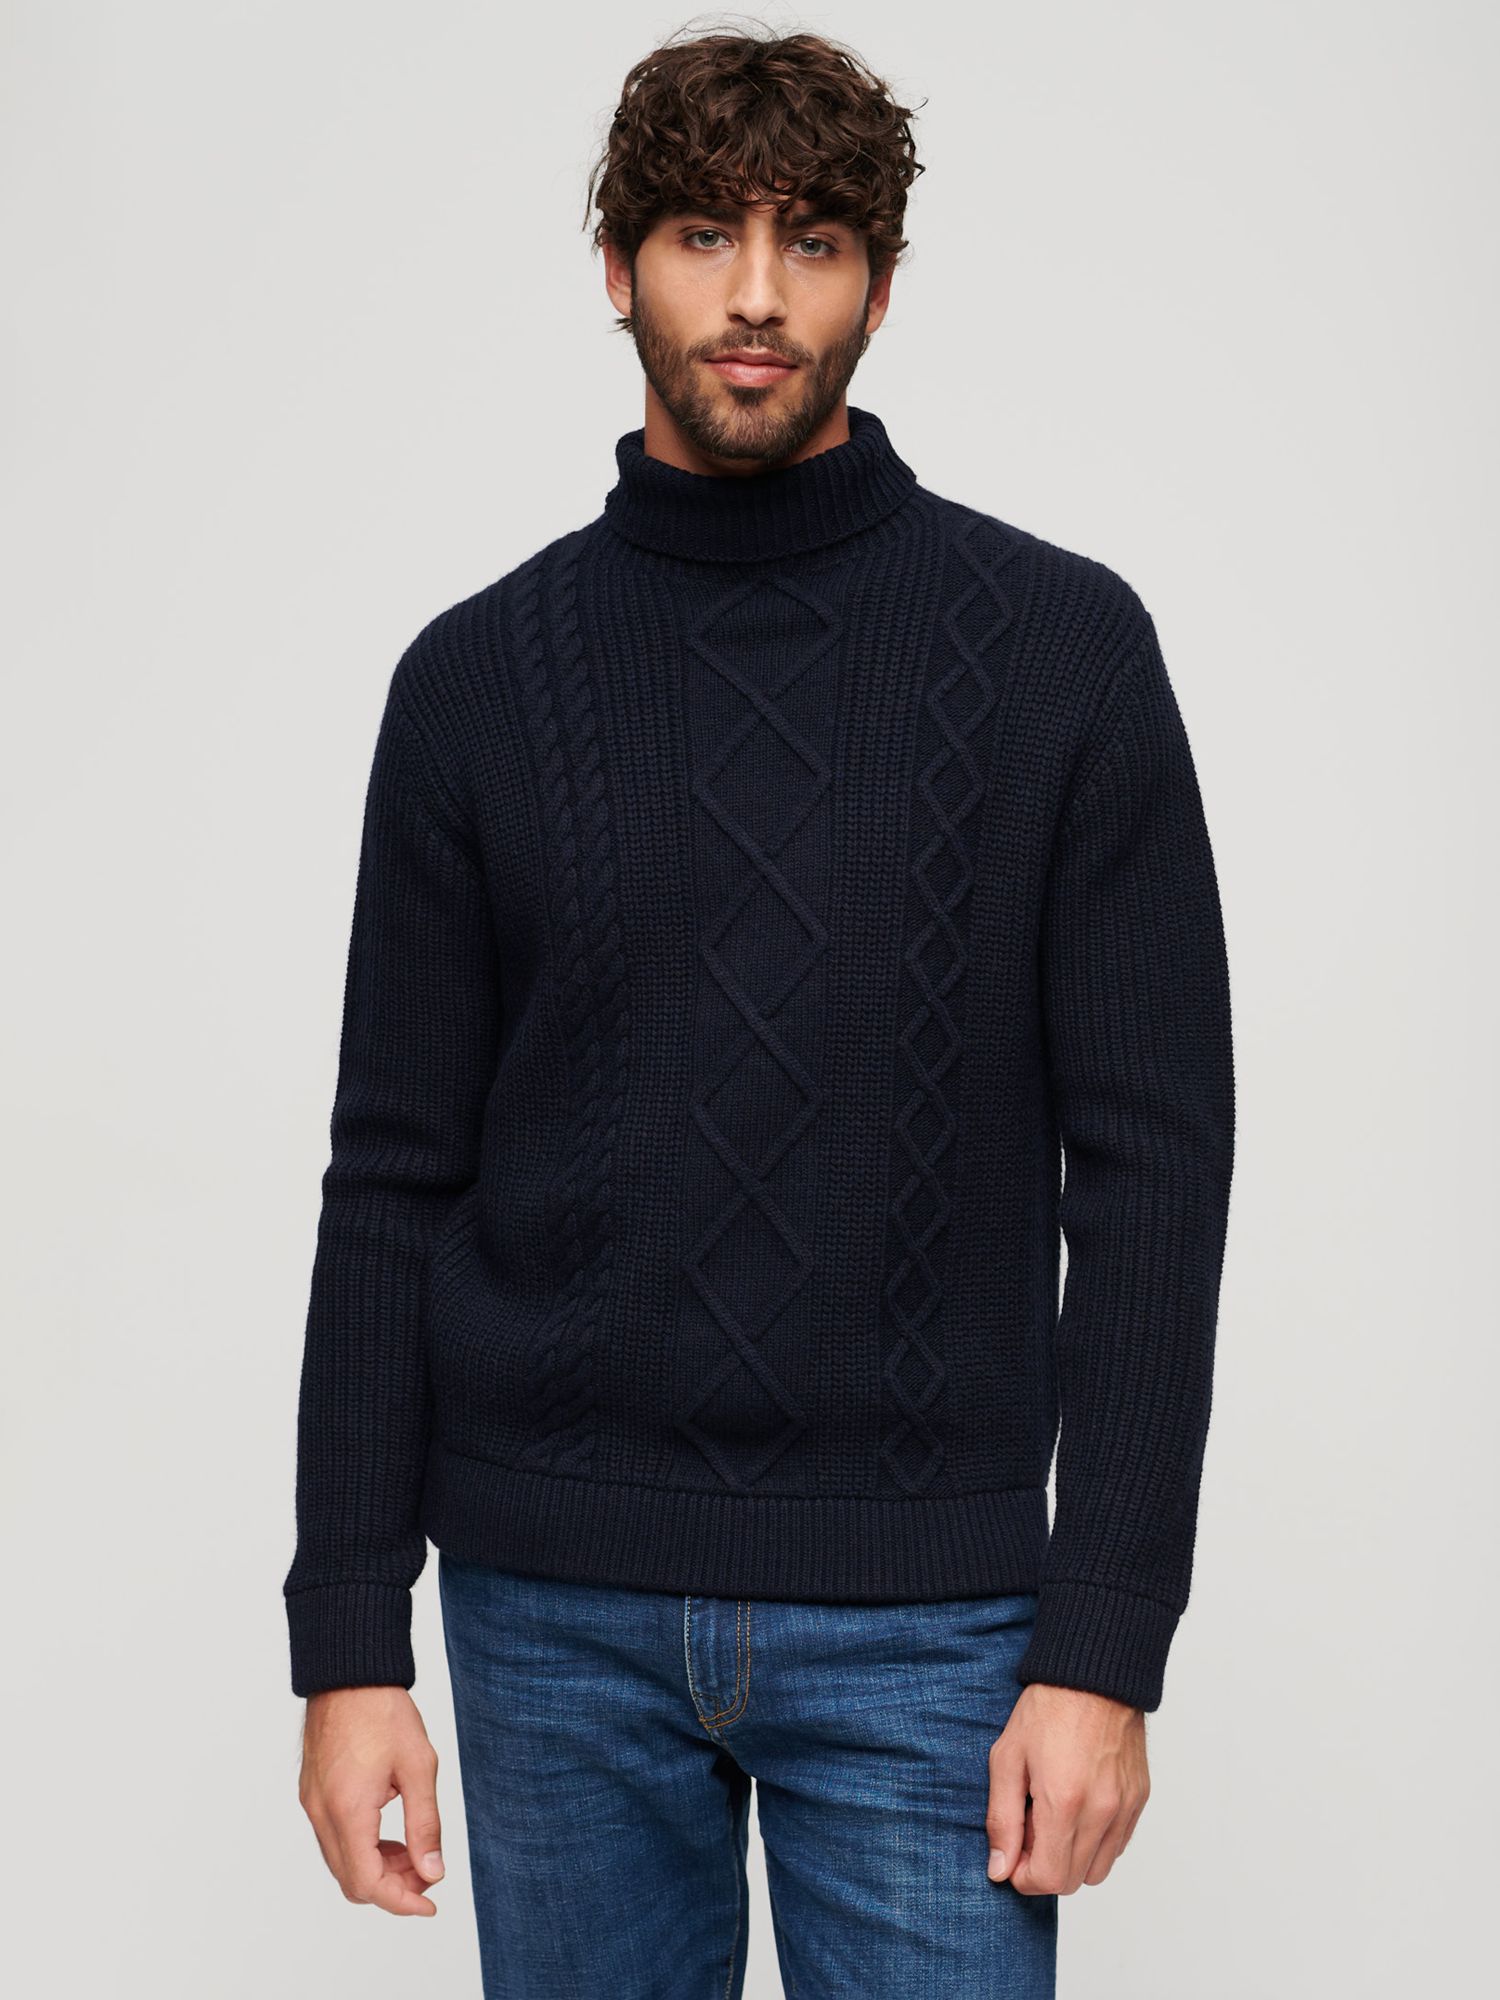 Superdry Wool Blend Cable Roll Neck Jumper, Navy, S